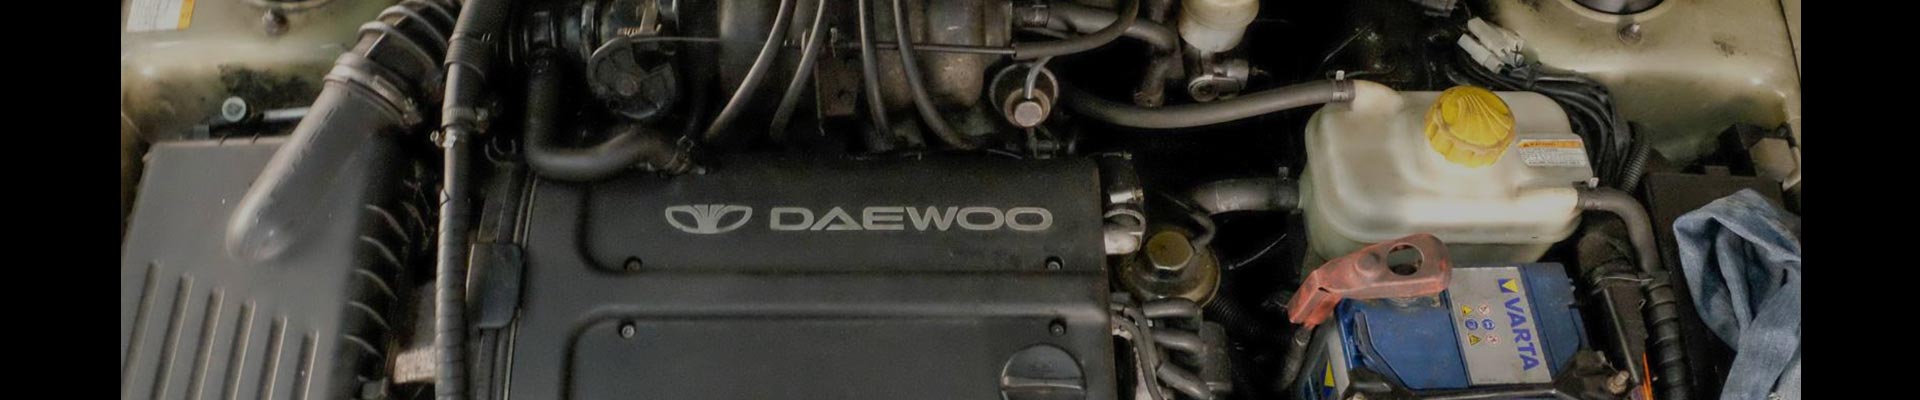 Shop Replacement 2000 Daewoo Lanos Parts with Discounted Price on the Net